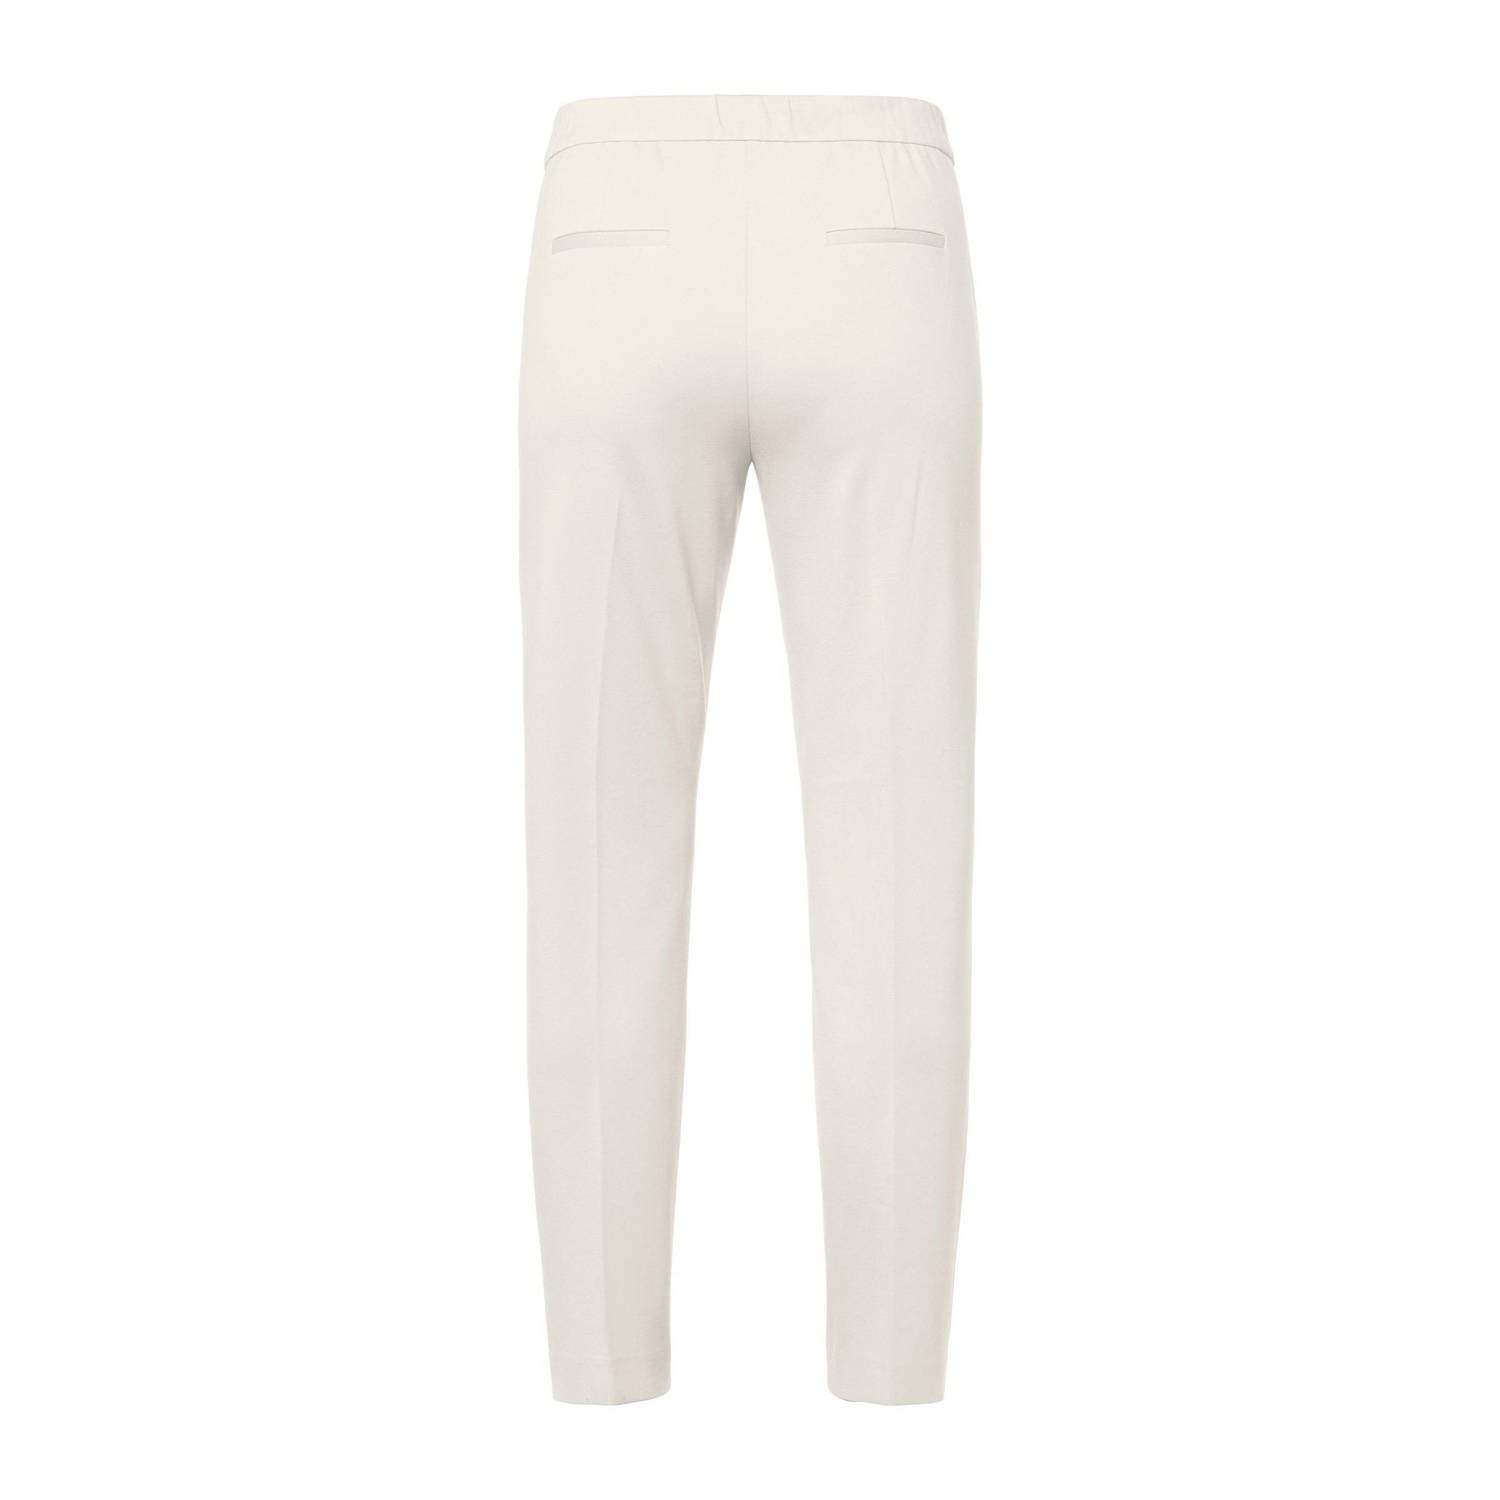 Beaumont cropped slim fit chino Charlie offwhite